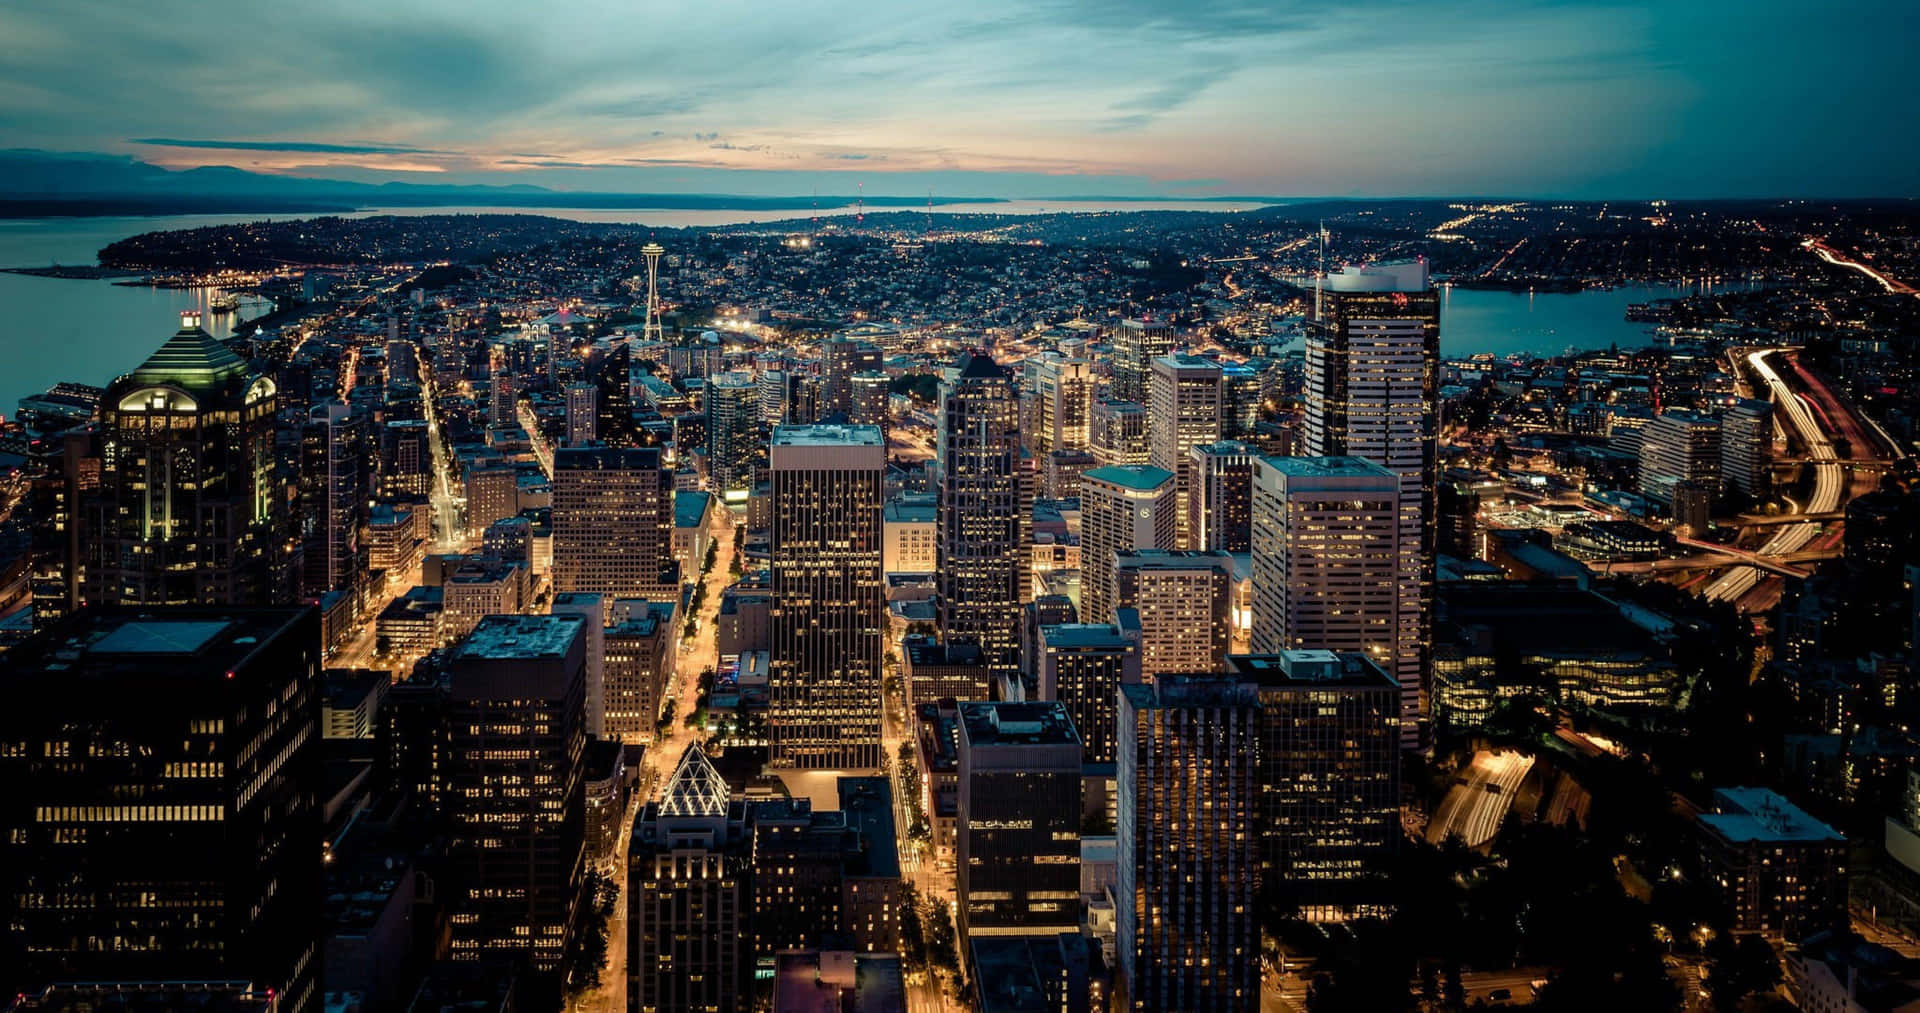 The Emerald City Glows: Seattle at Night Wallpaper